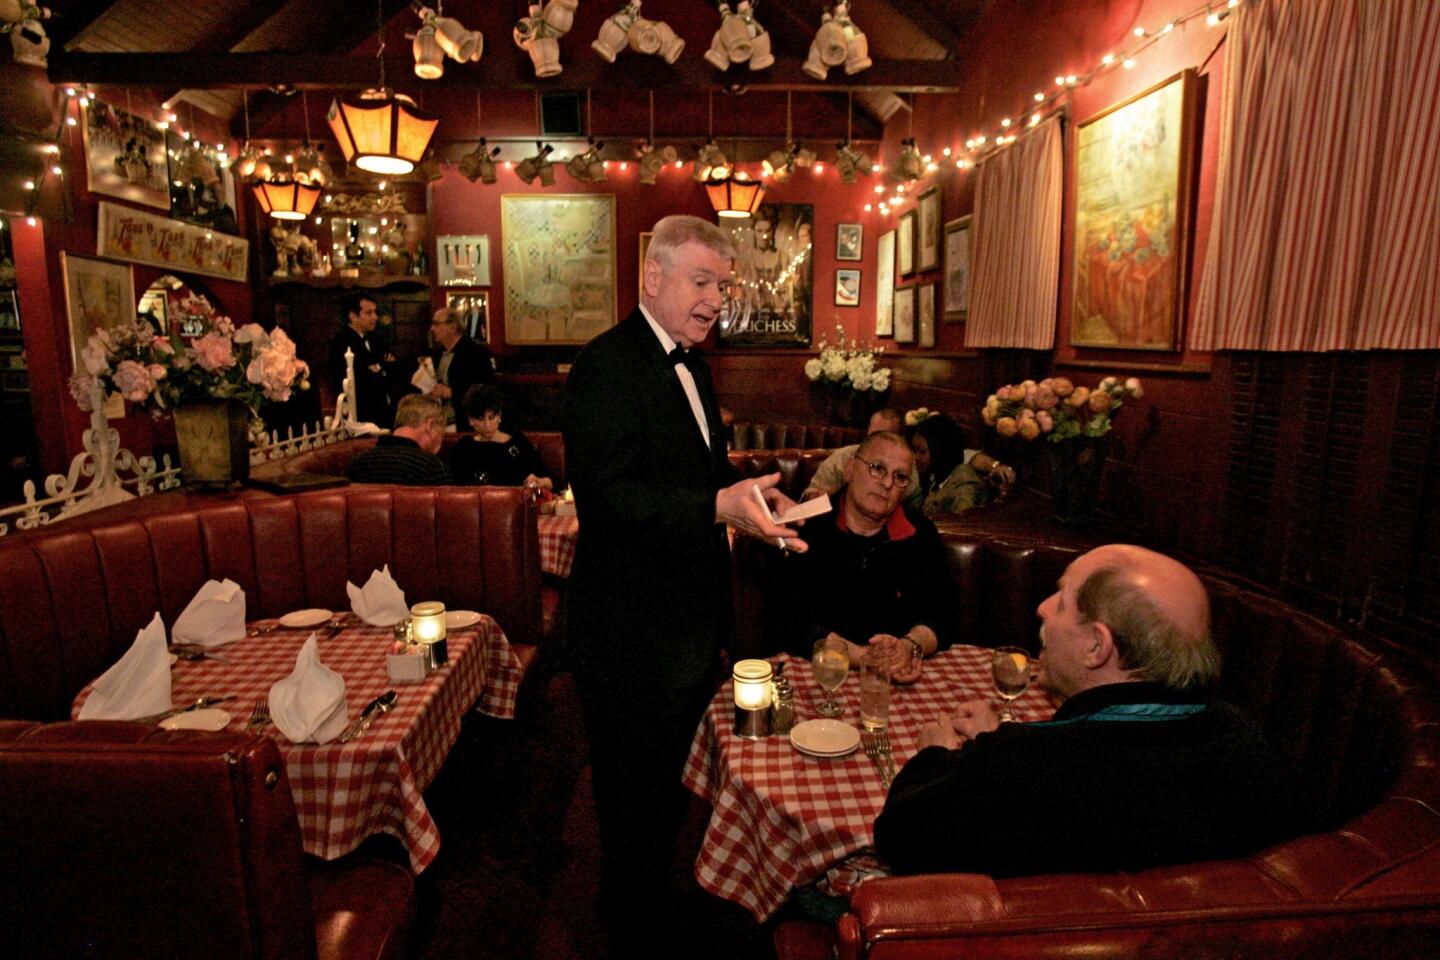 Now-retired waiter Vladimir Bezak interacts with customers at Dan Tana's restaurant in West Hollywood in 2009.